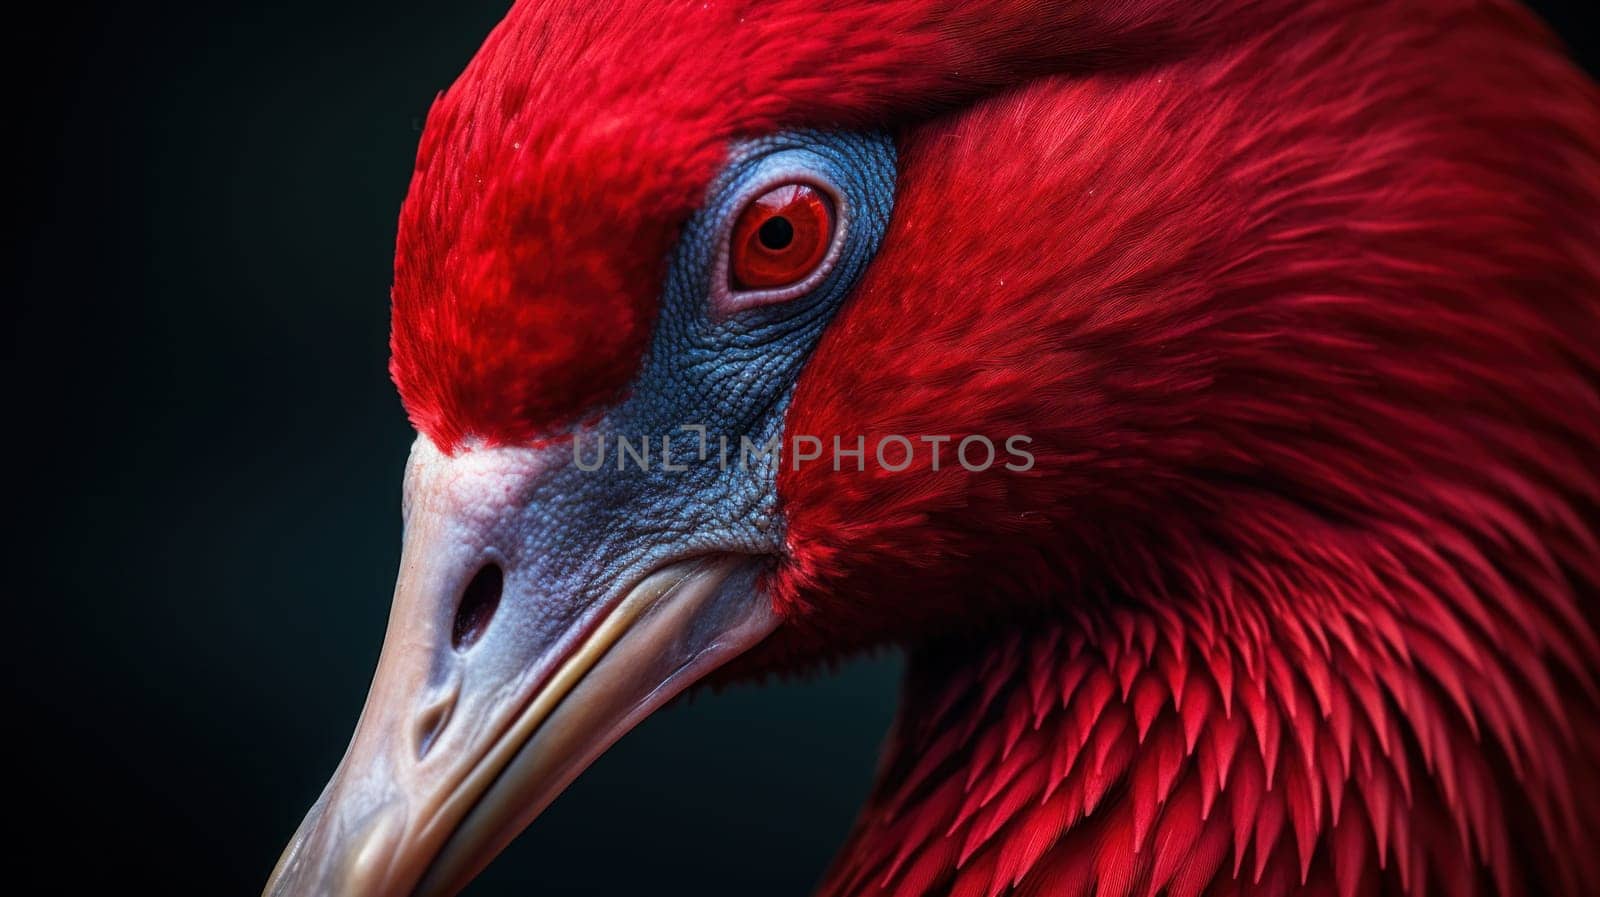 A close up of a red bird with blue eyes and feathers, AI by starush